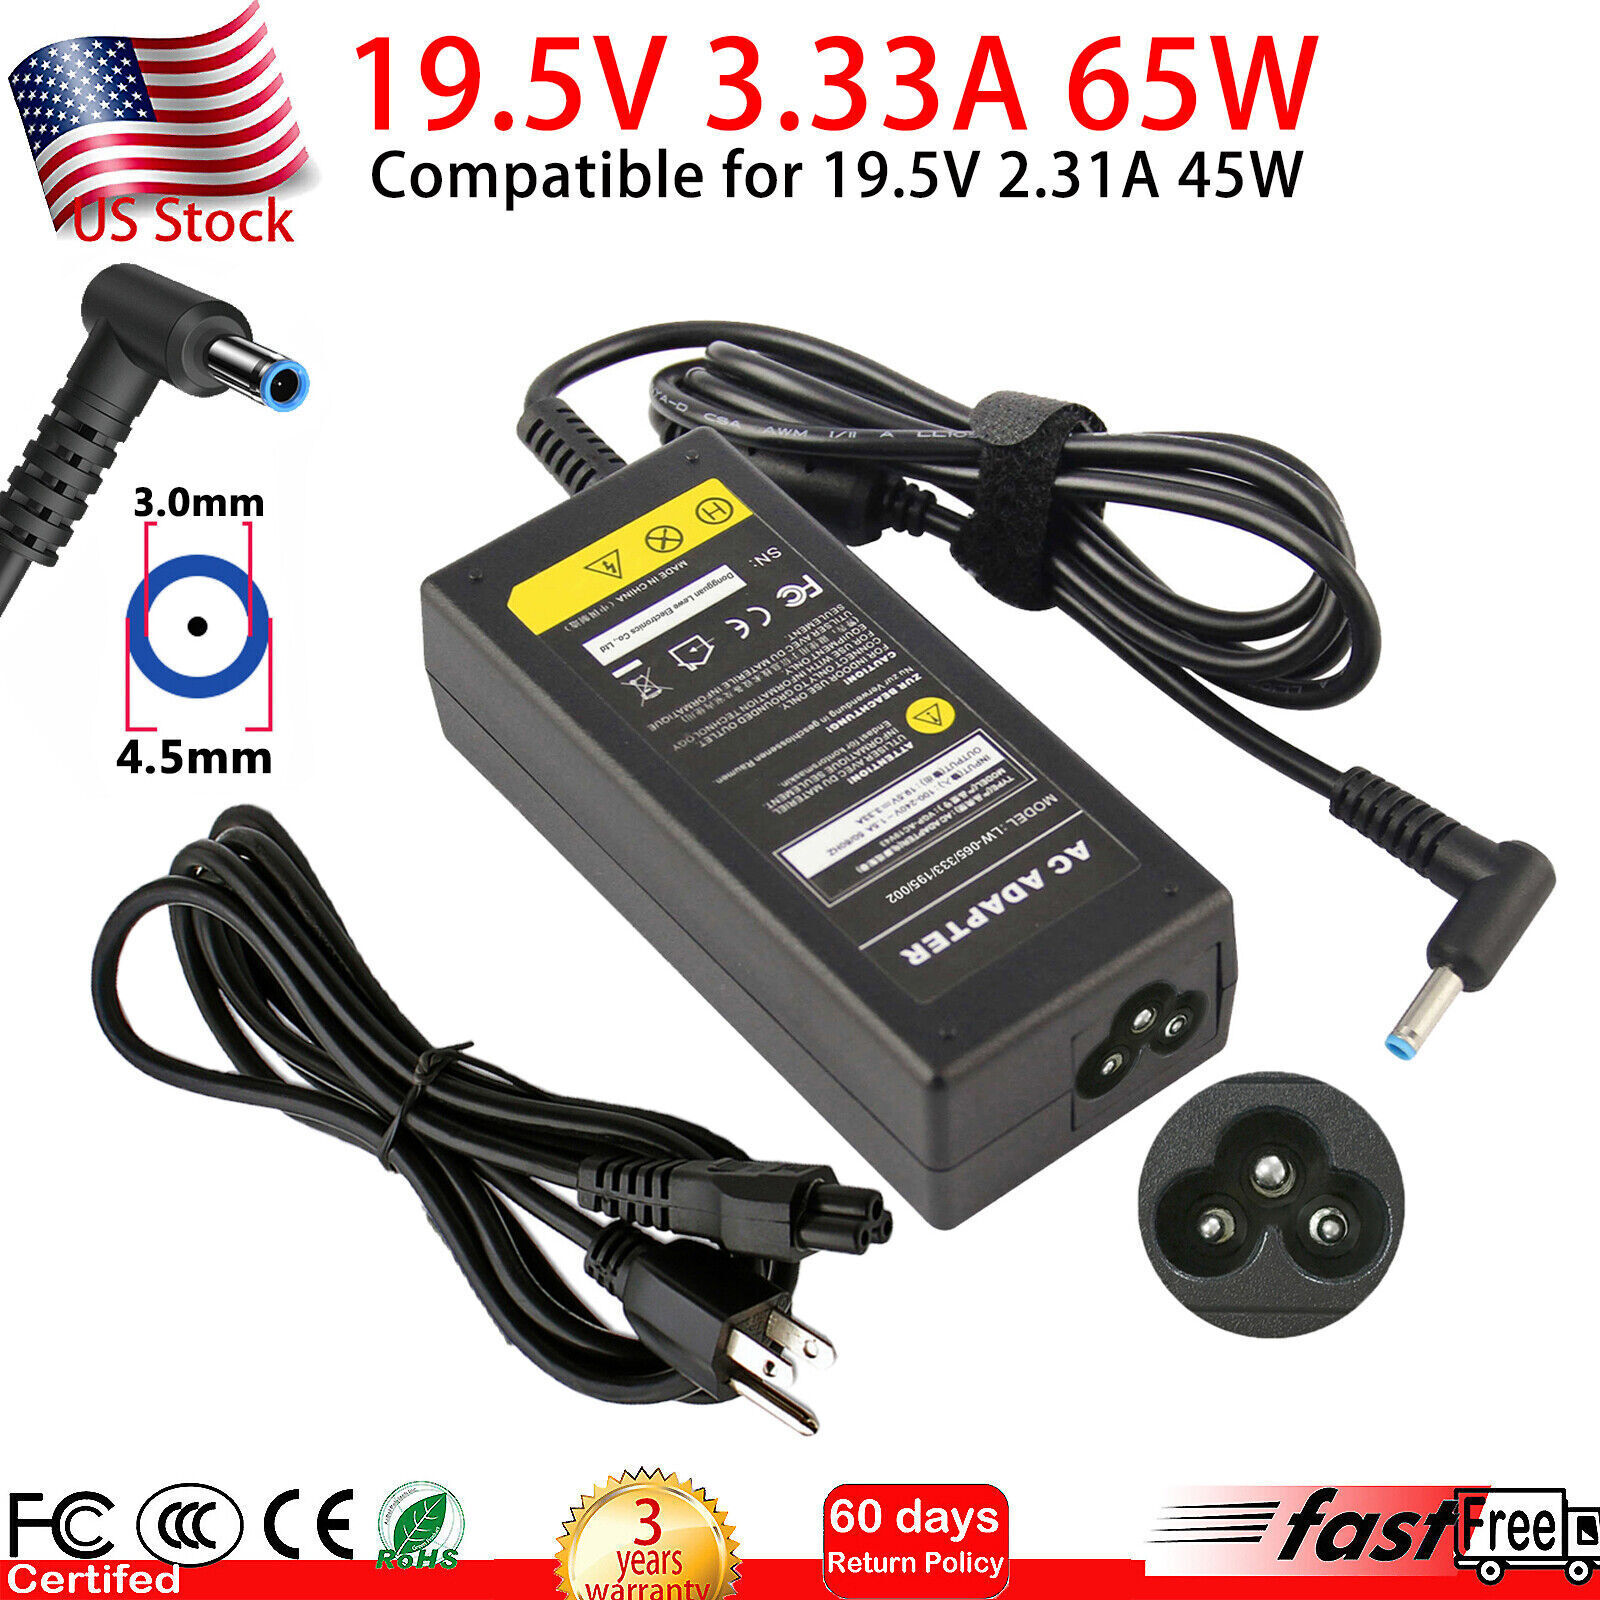 Charger For HP 15-dy2073dx 15-dy2073nr 15-dy2074nr Laptop AC Power Adapter Cord